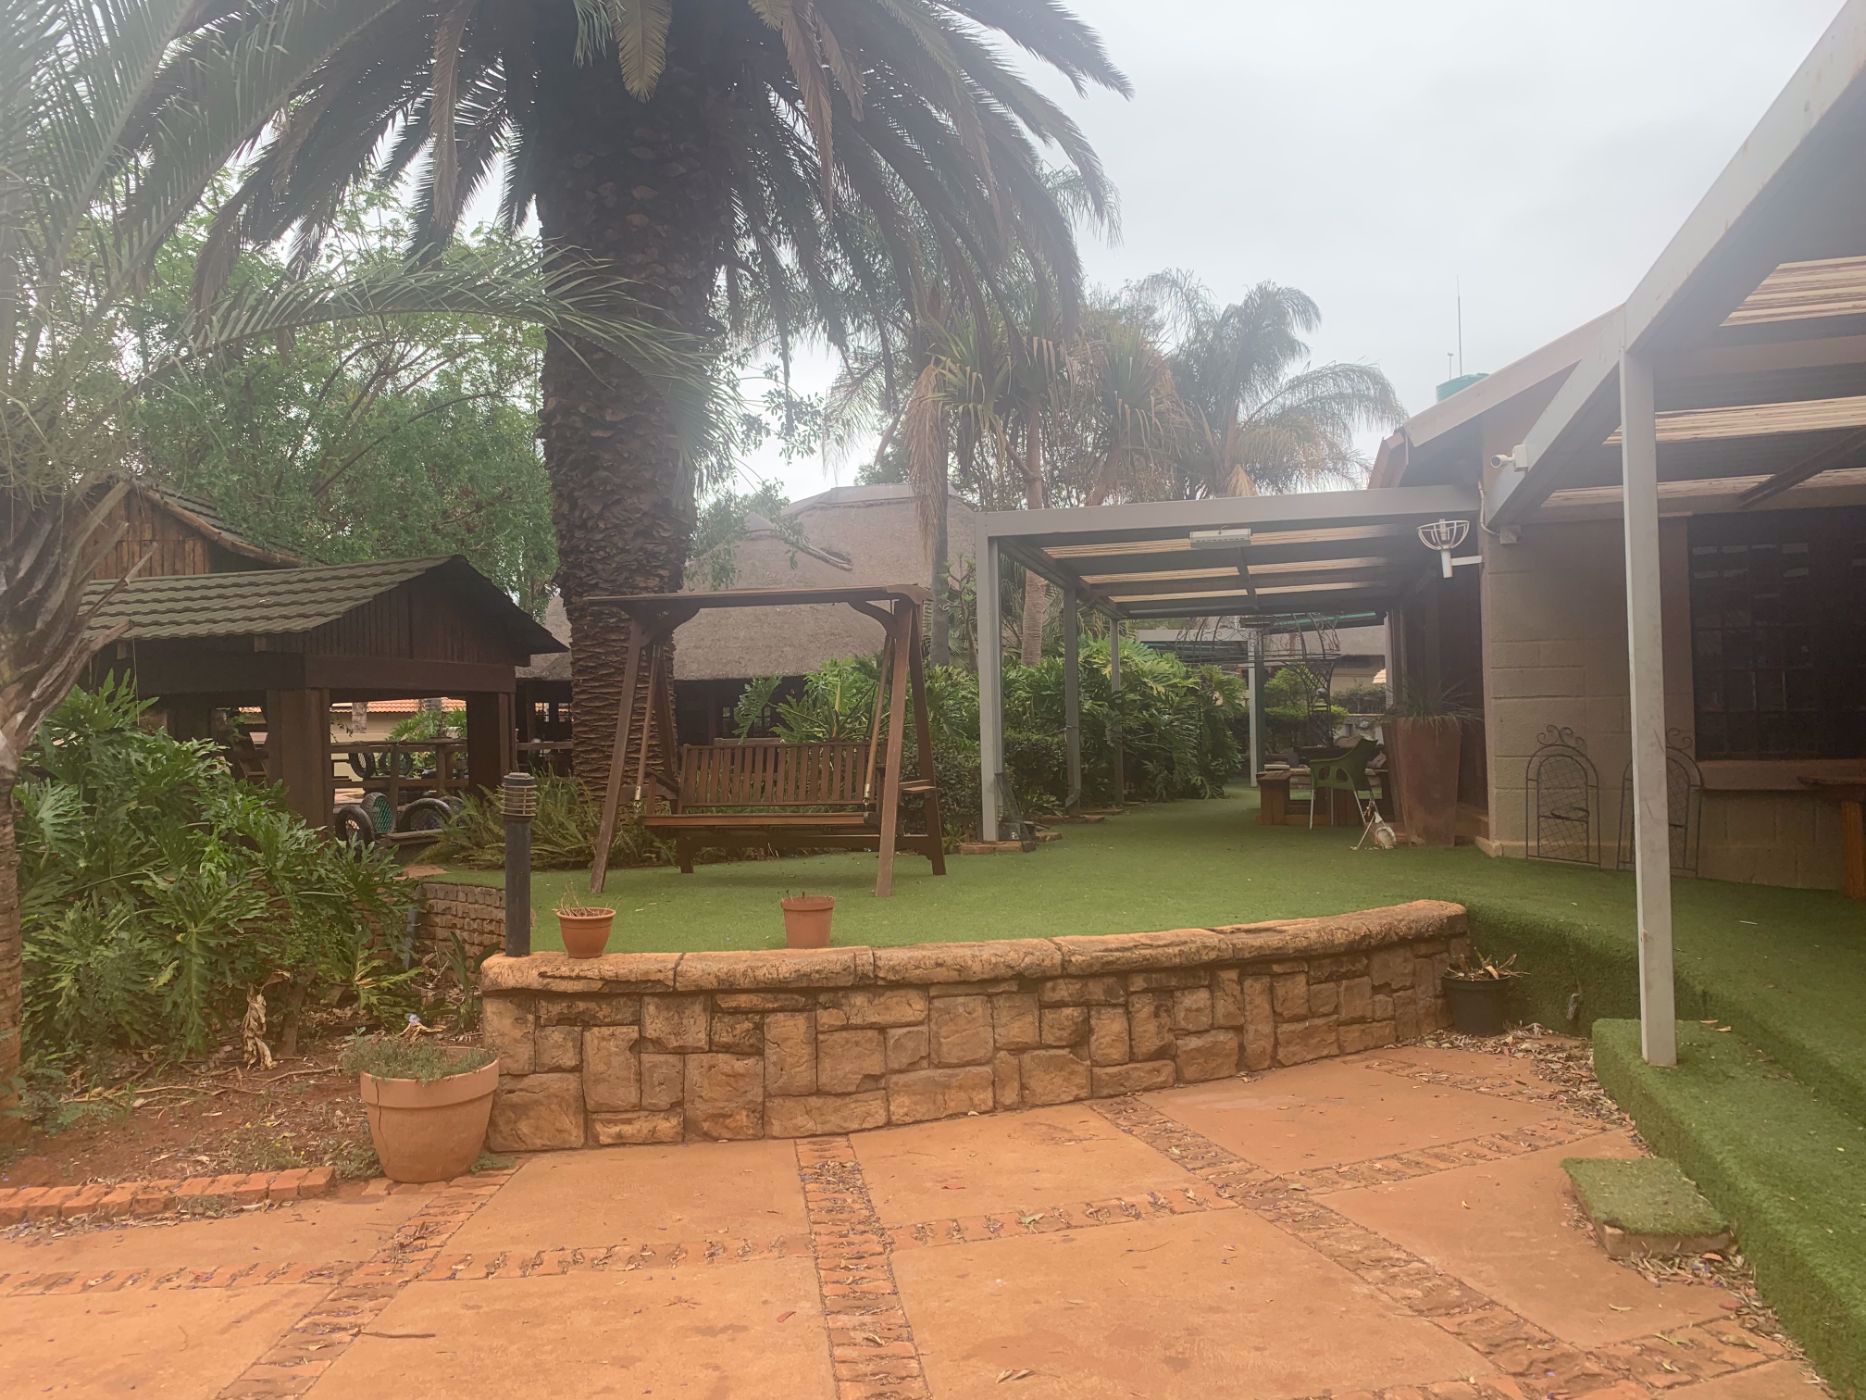 2.02 hectare smallholding for sale in Polokwane